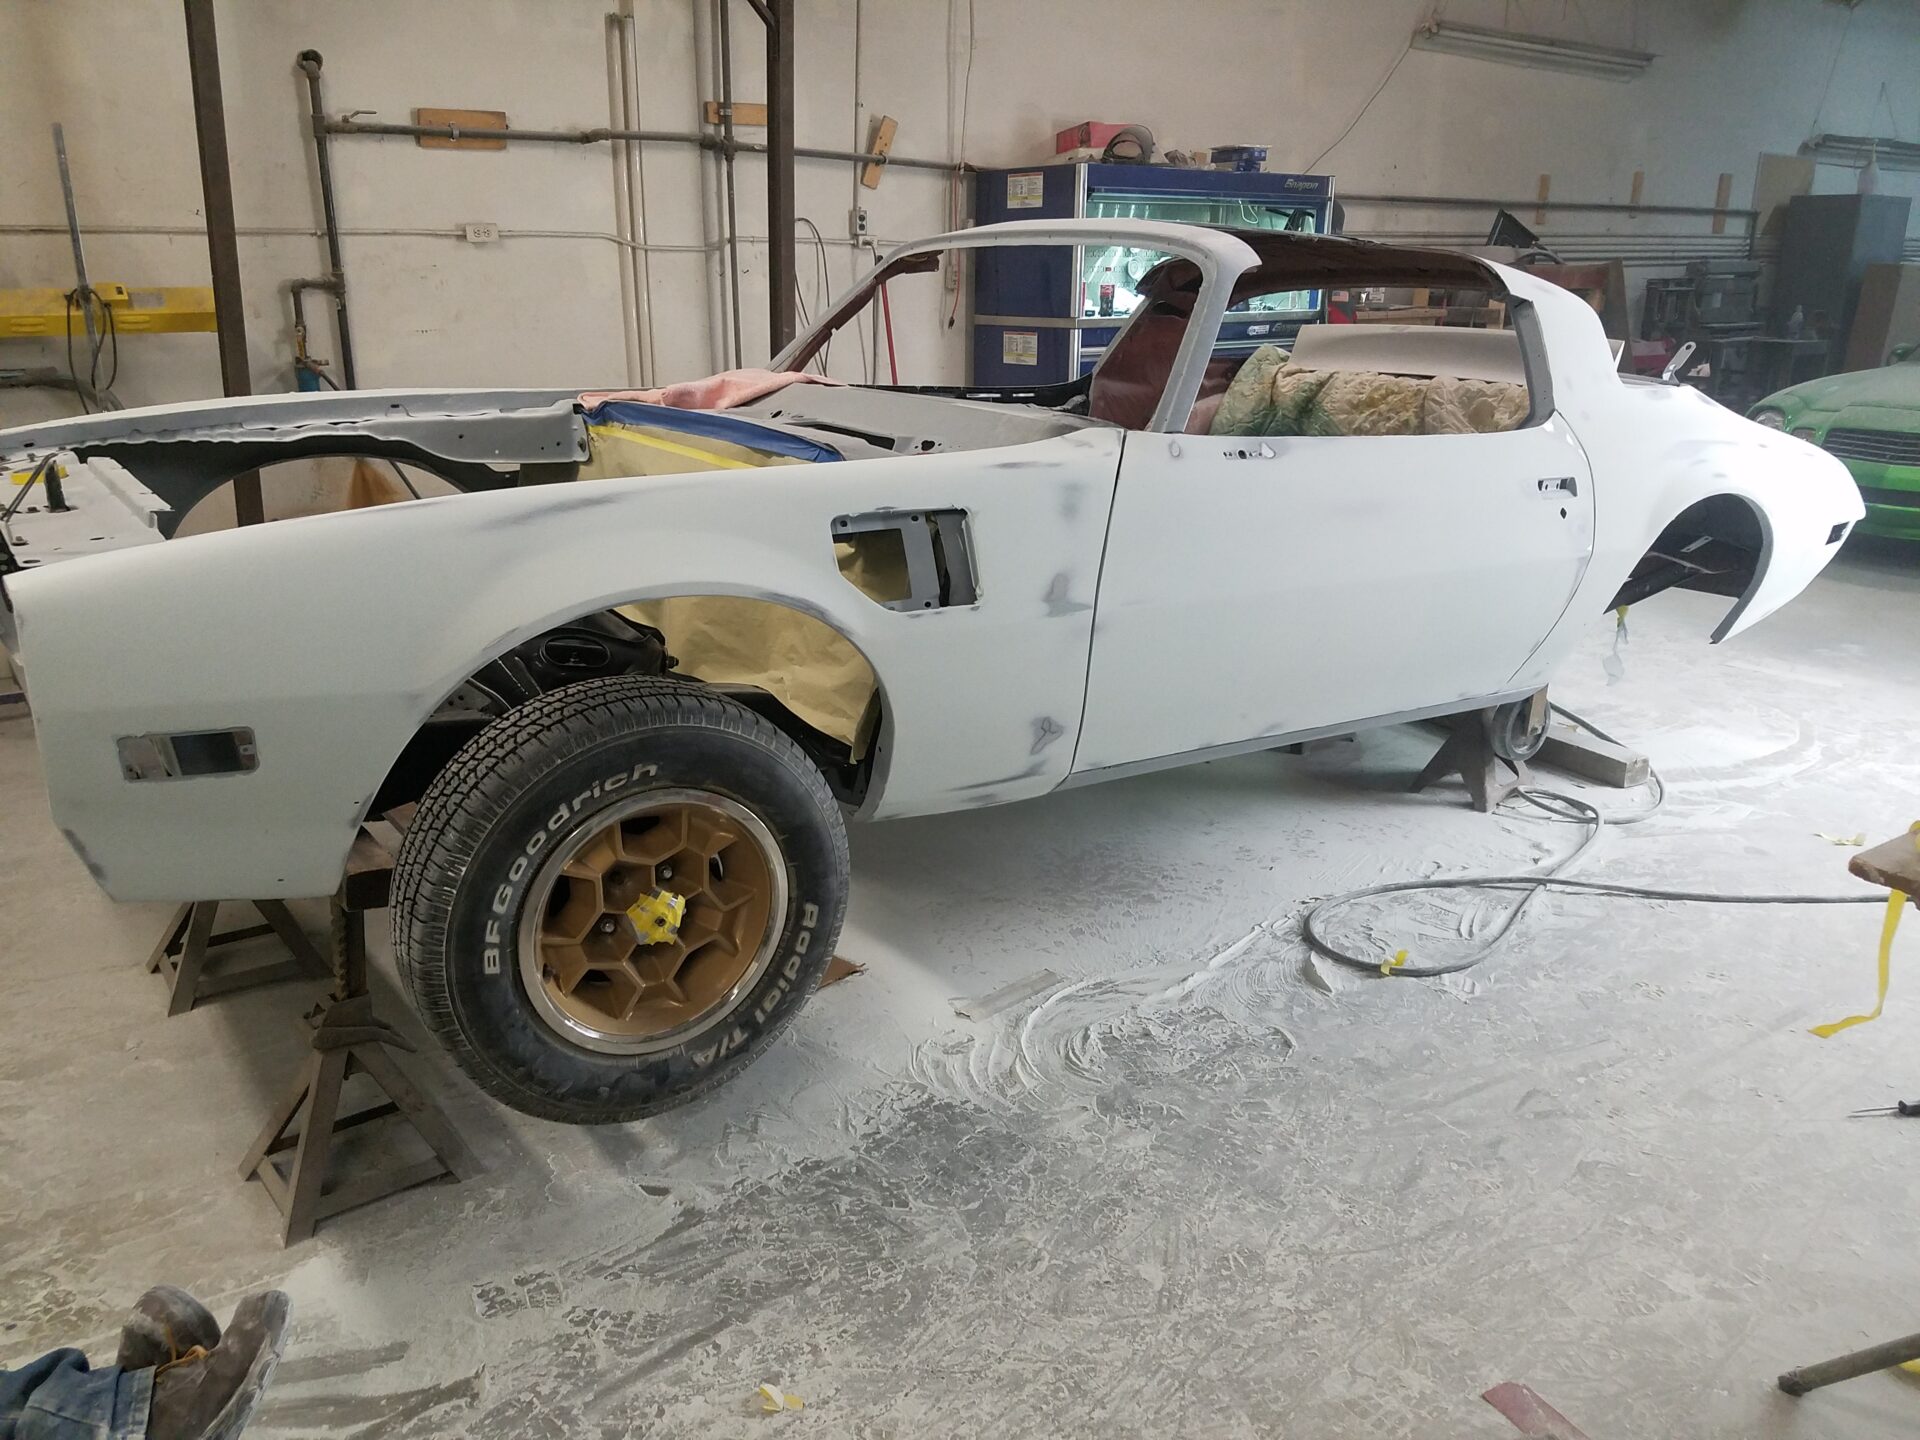 The 1976 Pontiac Trans Am S/E coated in white